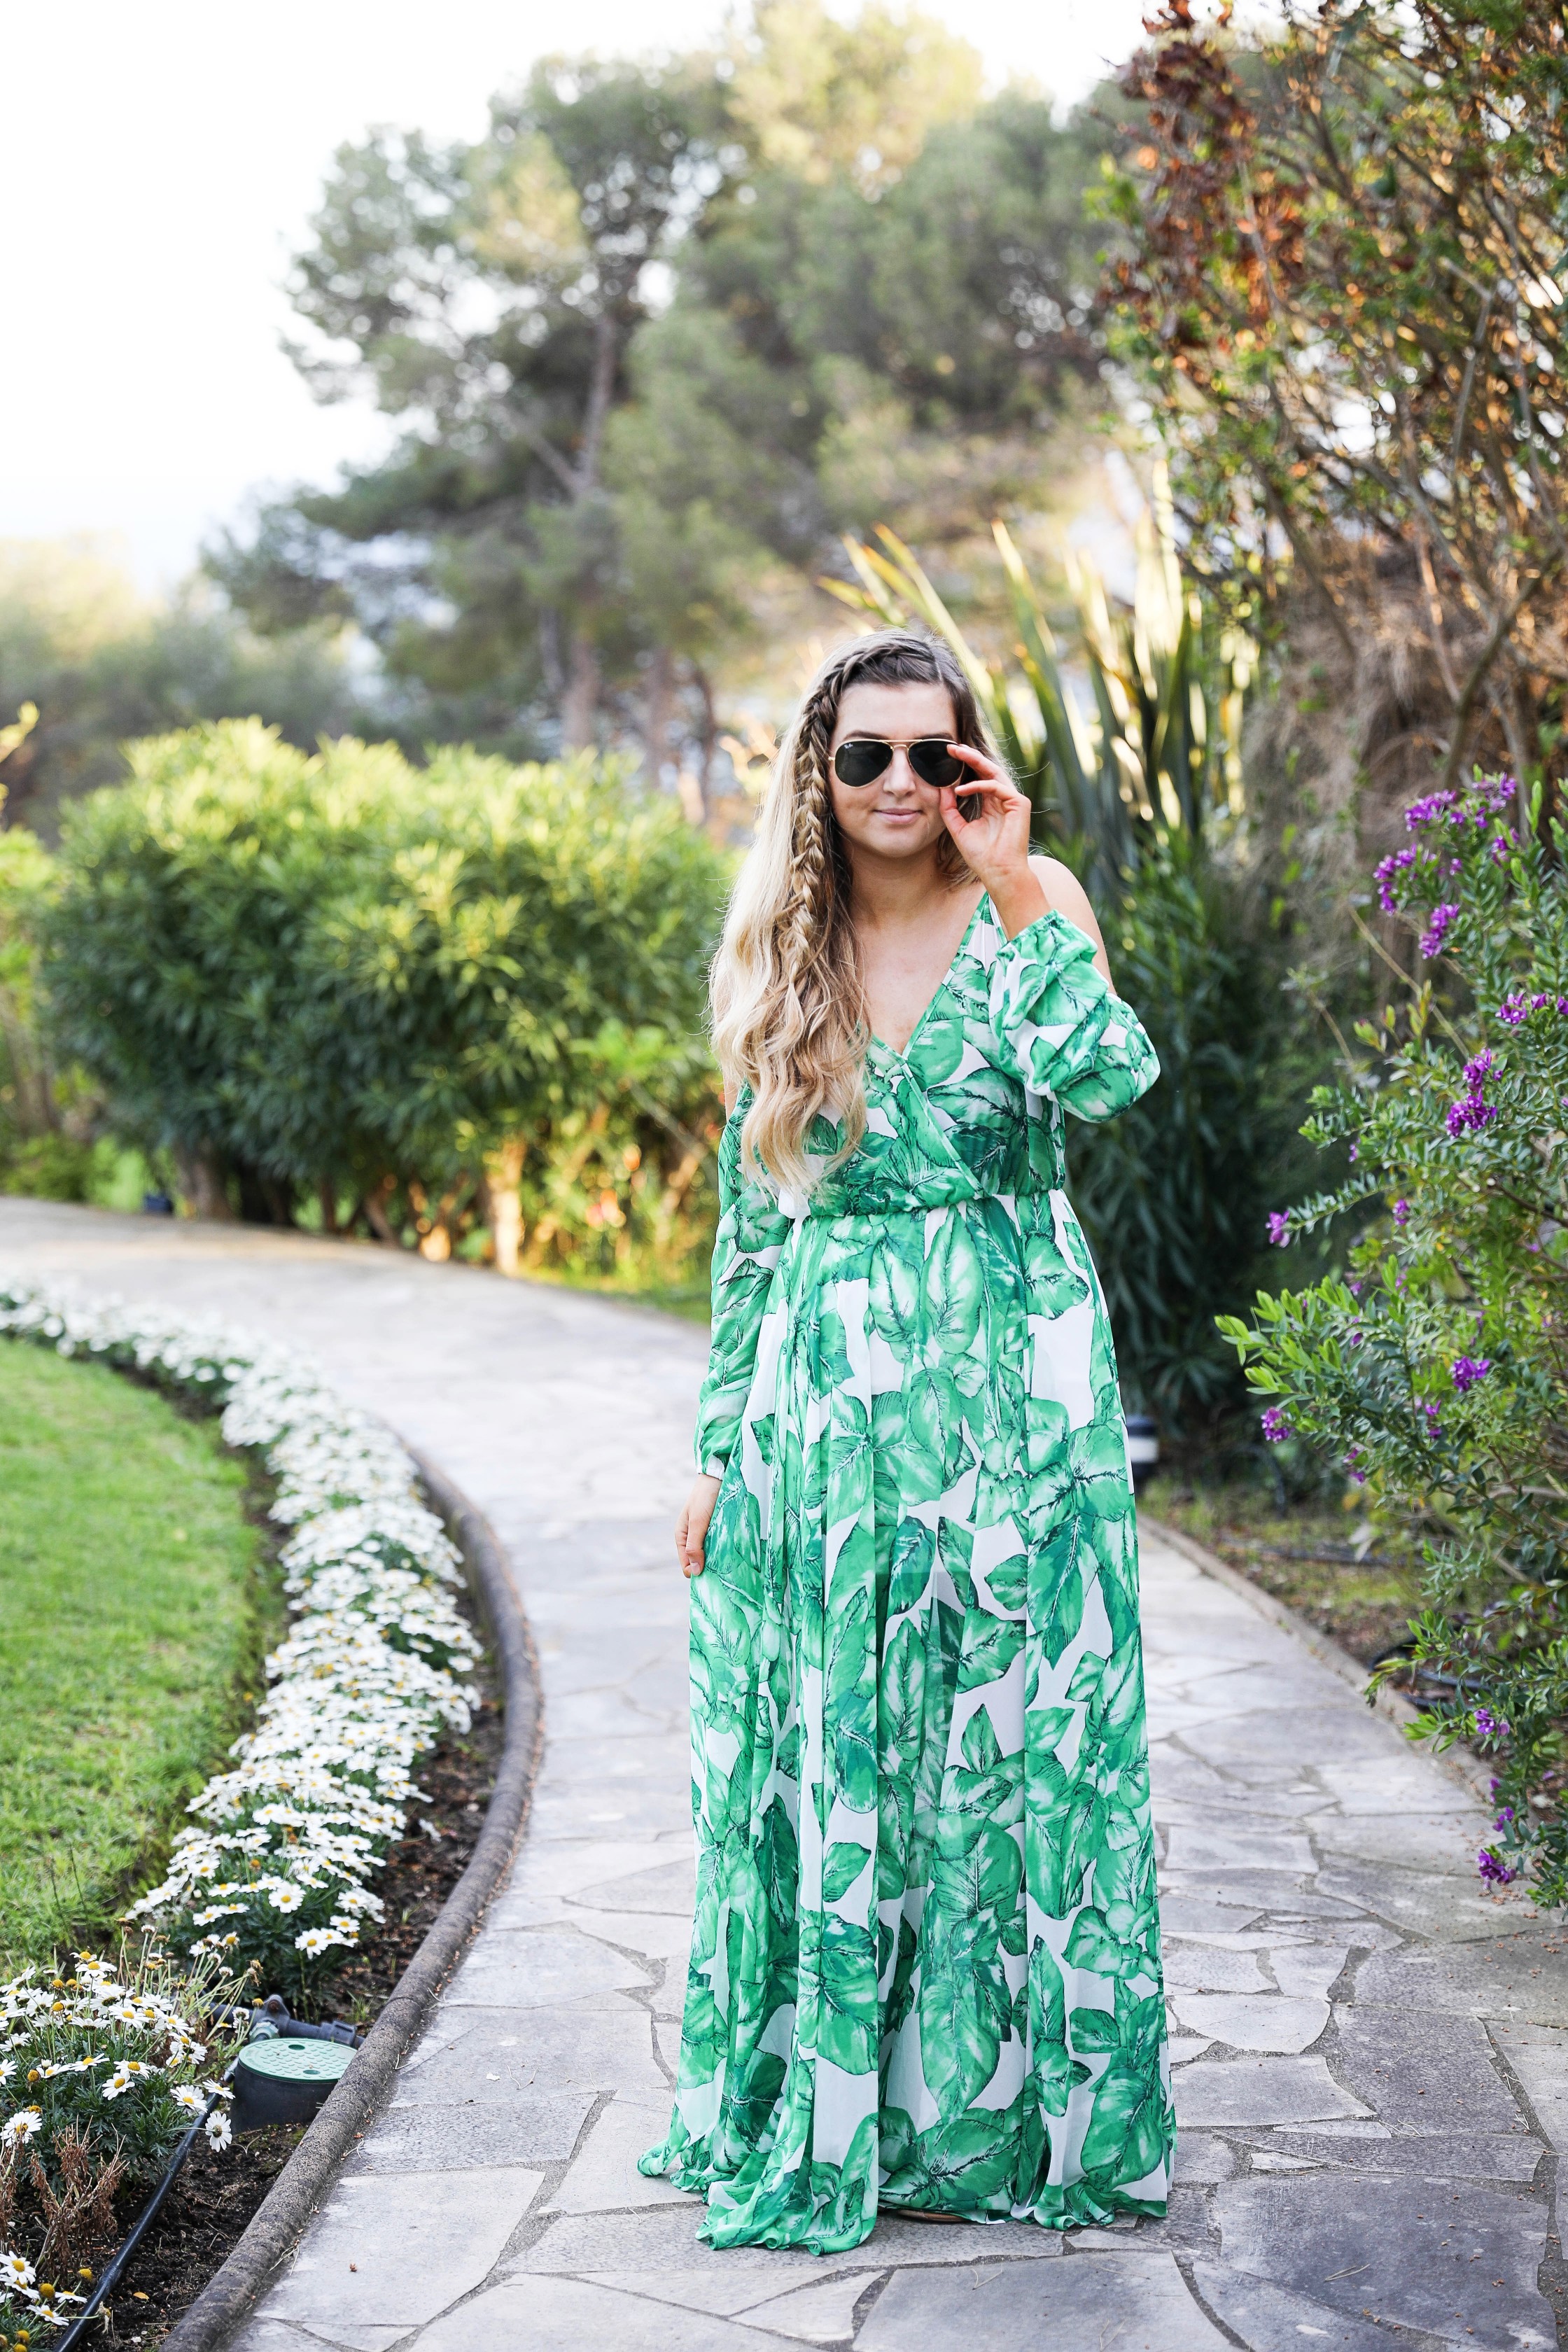 The perfect flowy island dress! I love the tropical print dress and it was a perfect outfit for Nice, France! By Lauren Lindmark on daily dose of charm dailydoseofcharm.com